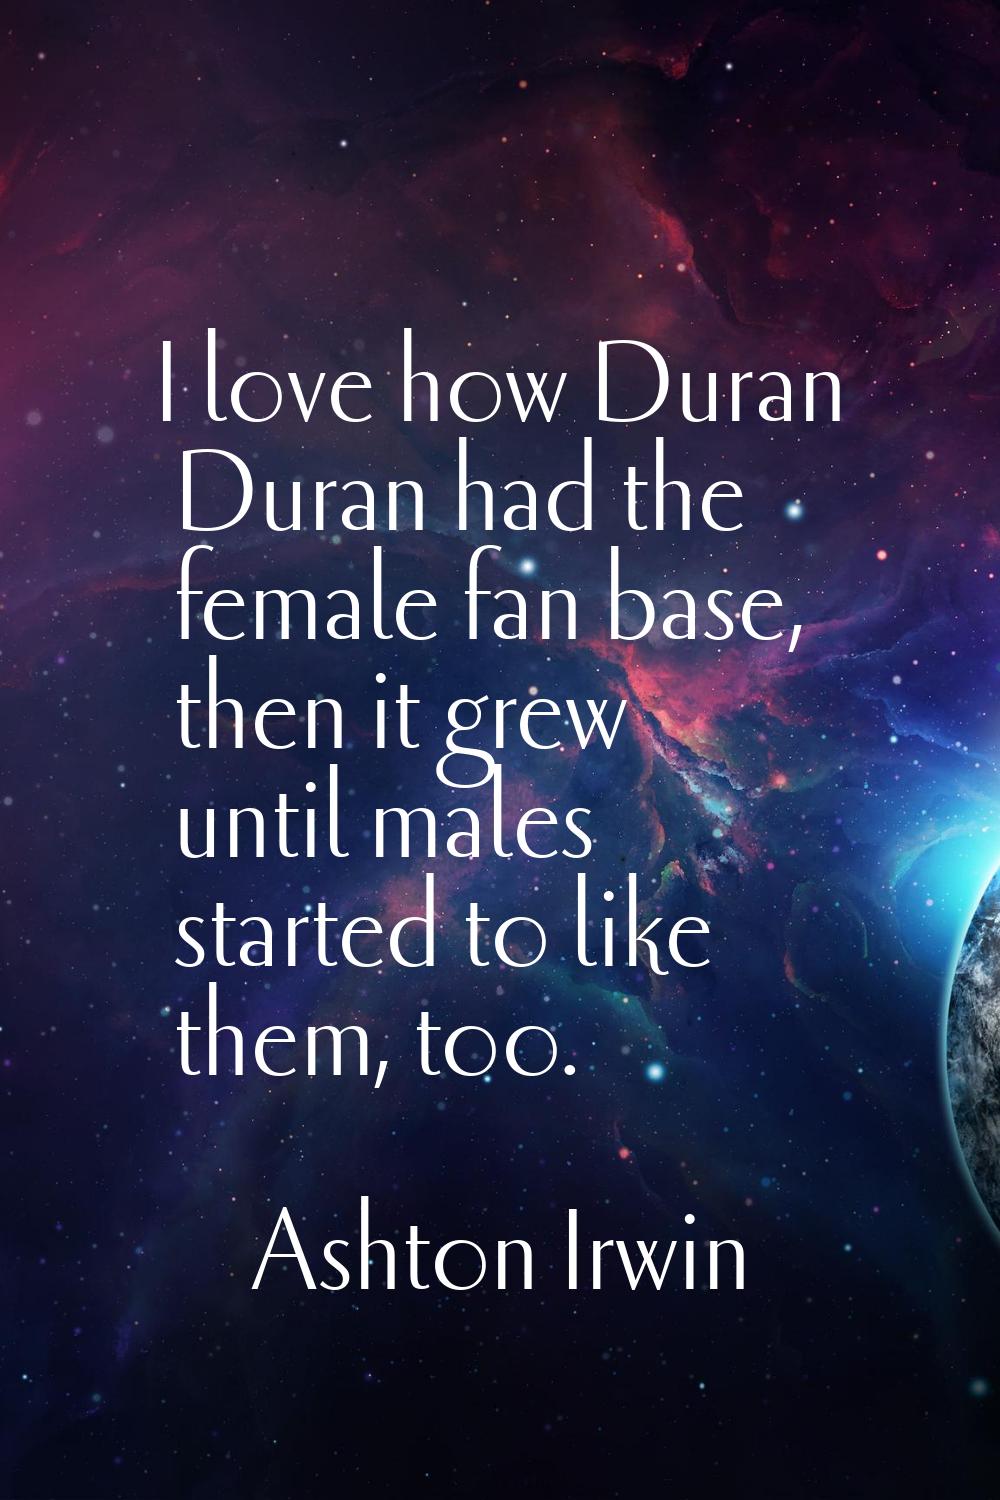 I love how Duran Duran had the female fan base, then it grew until males started to like them, too.